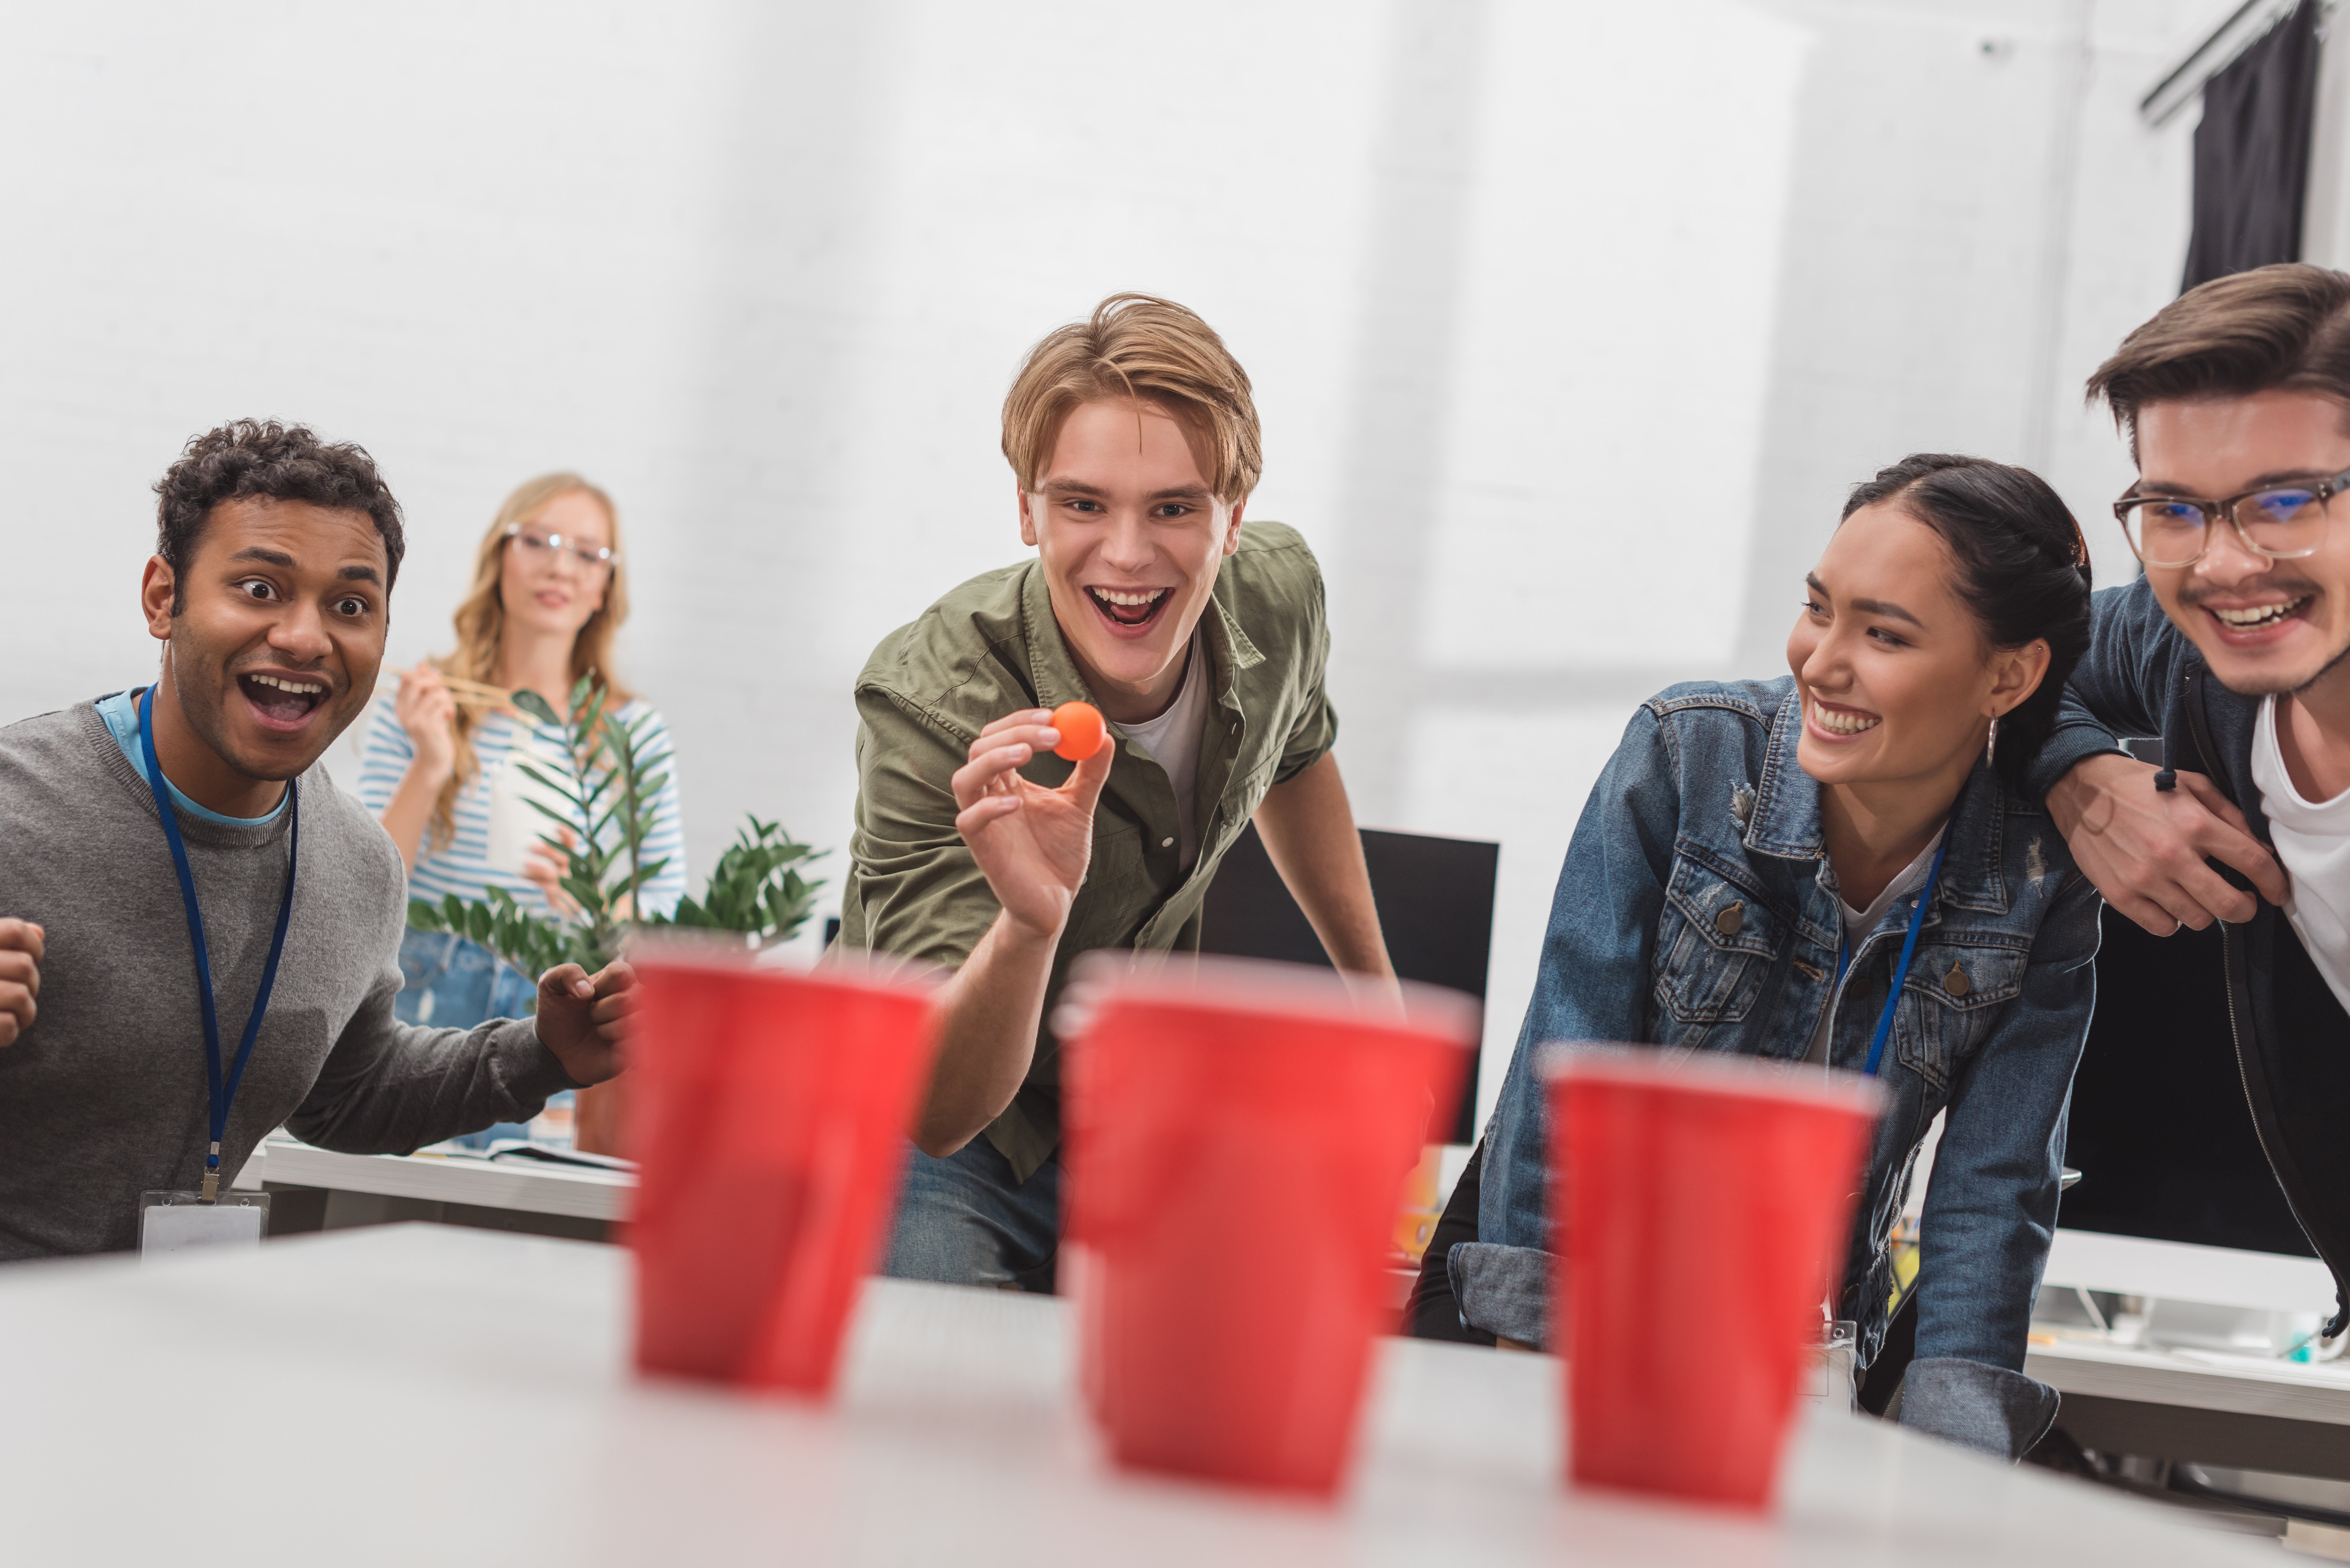 marketing agency market research beer pong